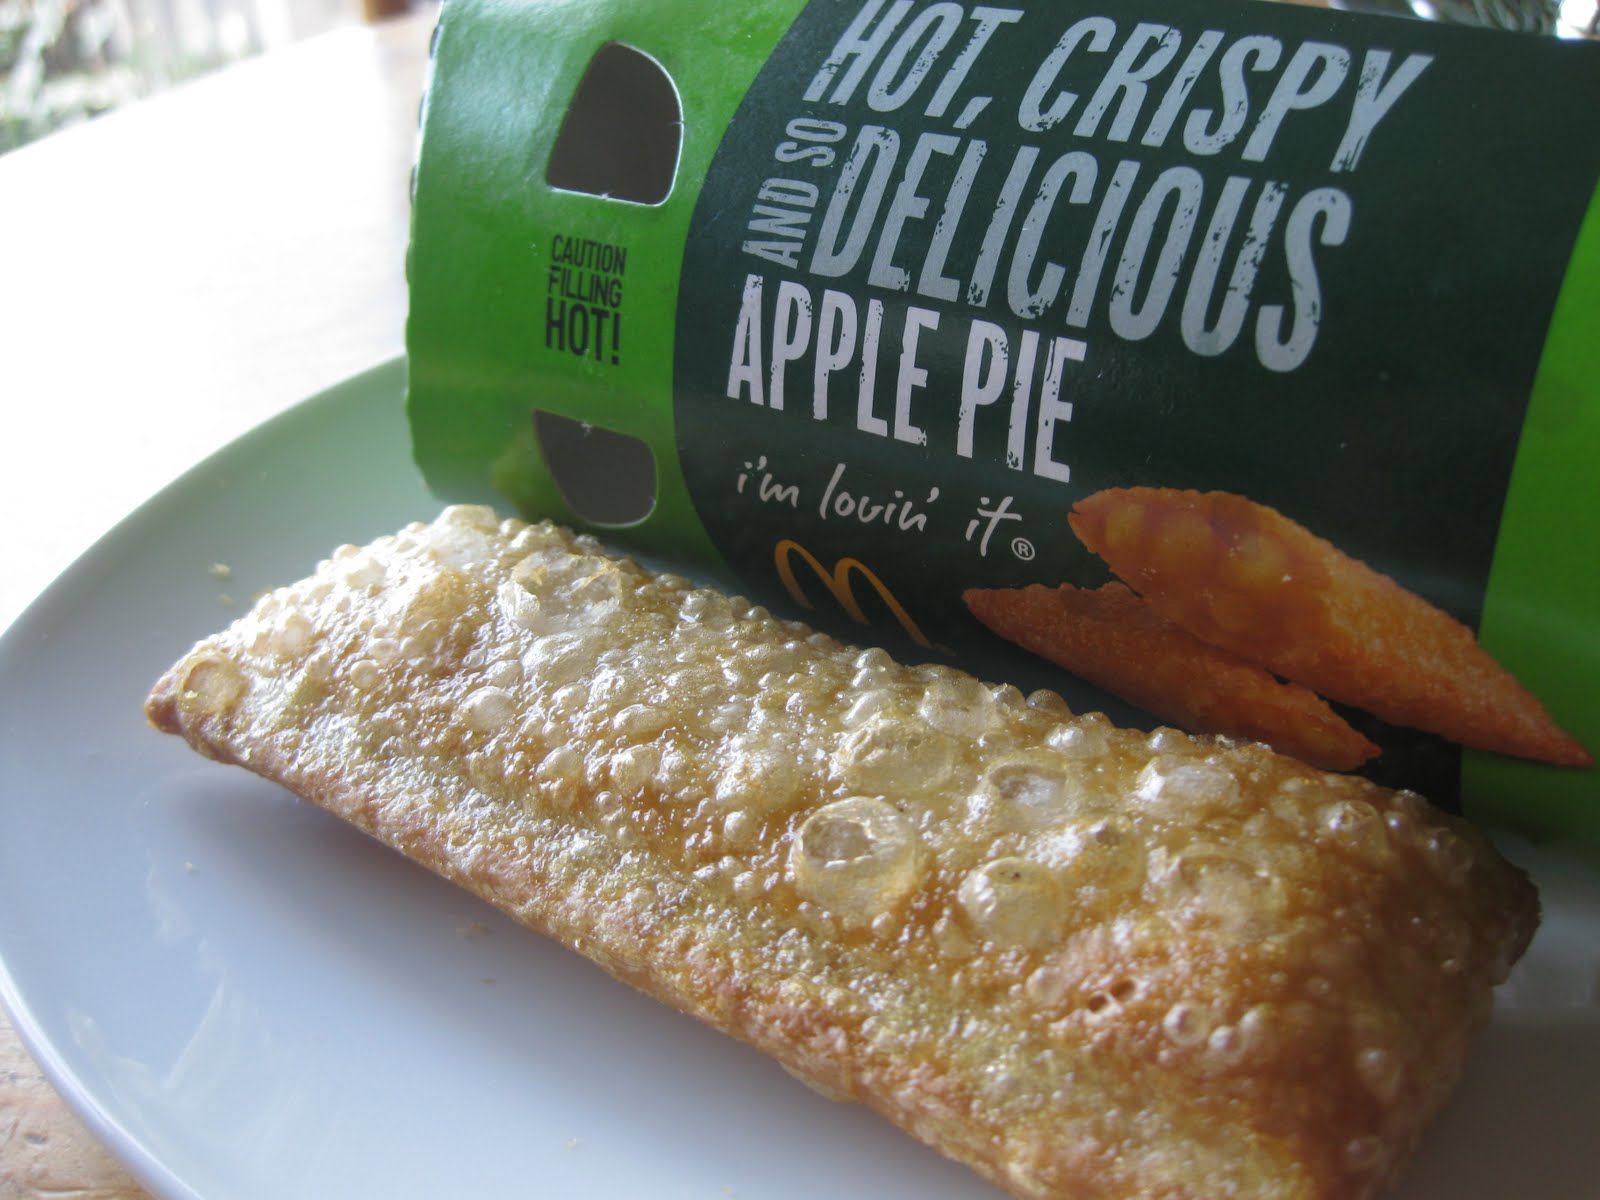 They Don’t Make Them Like They Used To - mcdonalds apple pie deep fried - Caution Filling Hot! Hot Crispy Delicious Apple Pie i'm lovin' it Onv